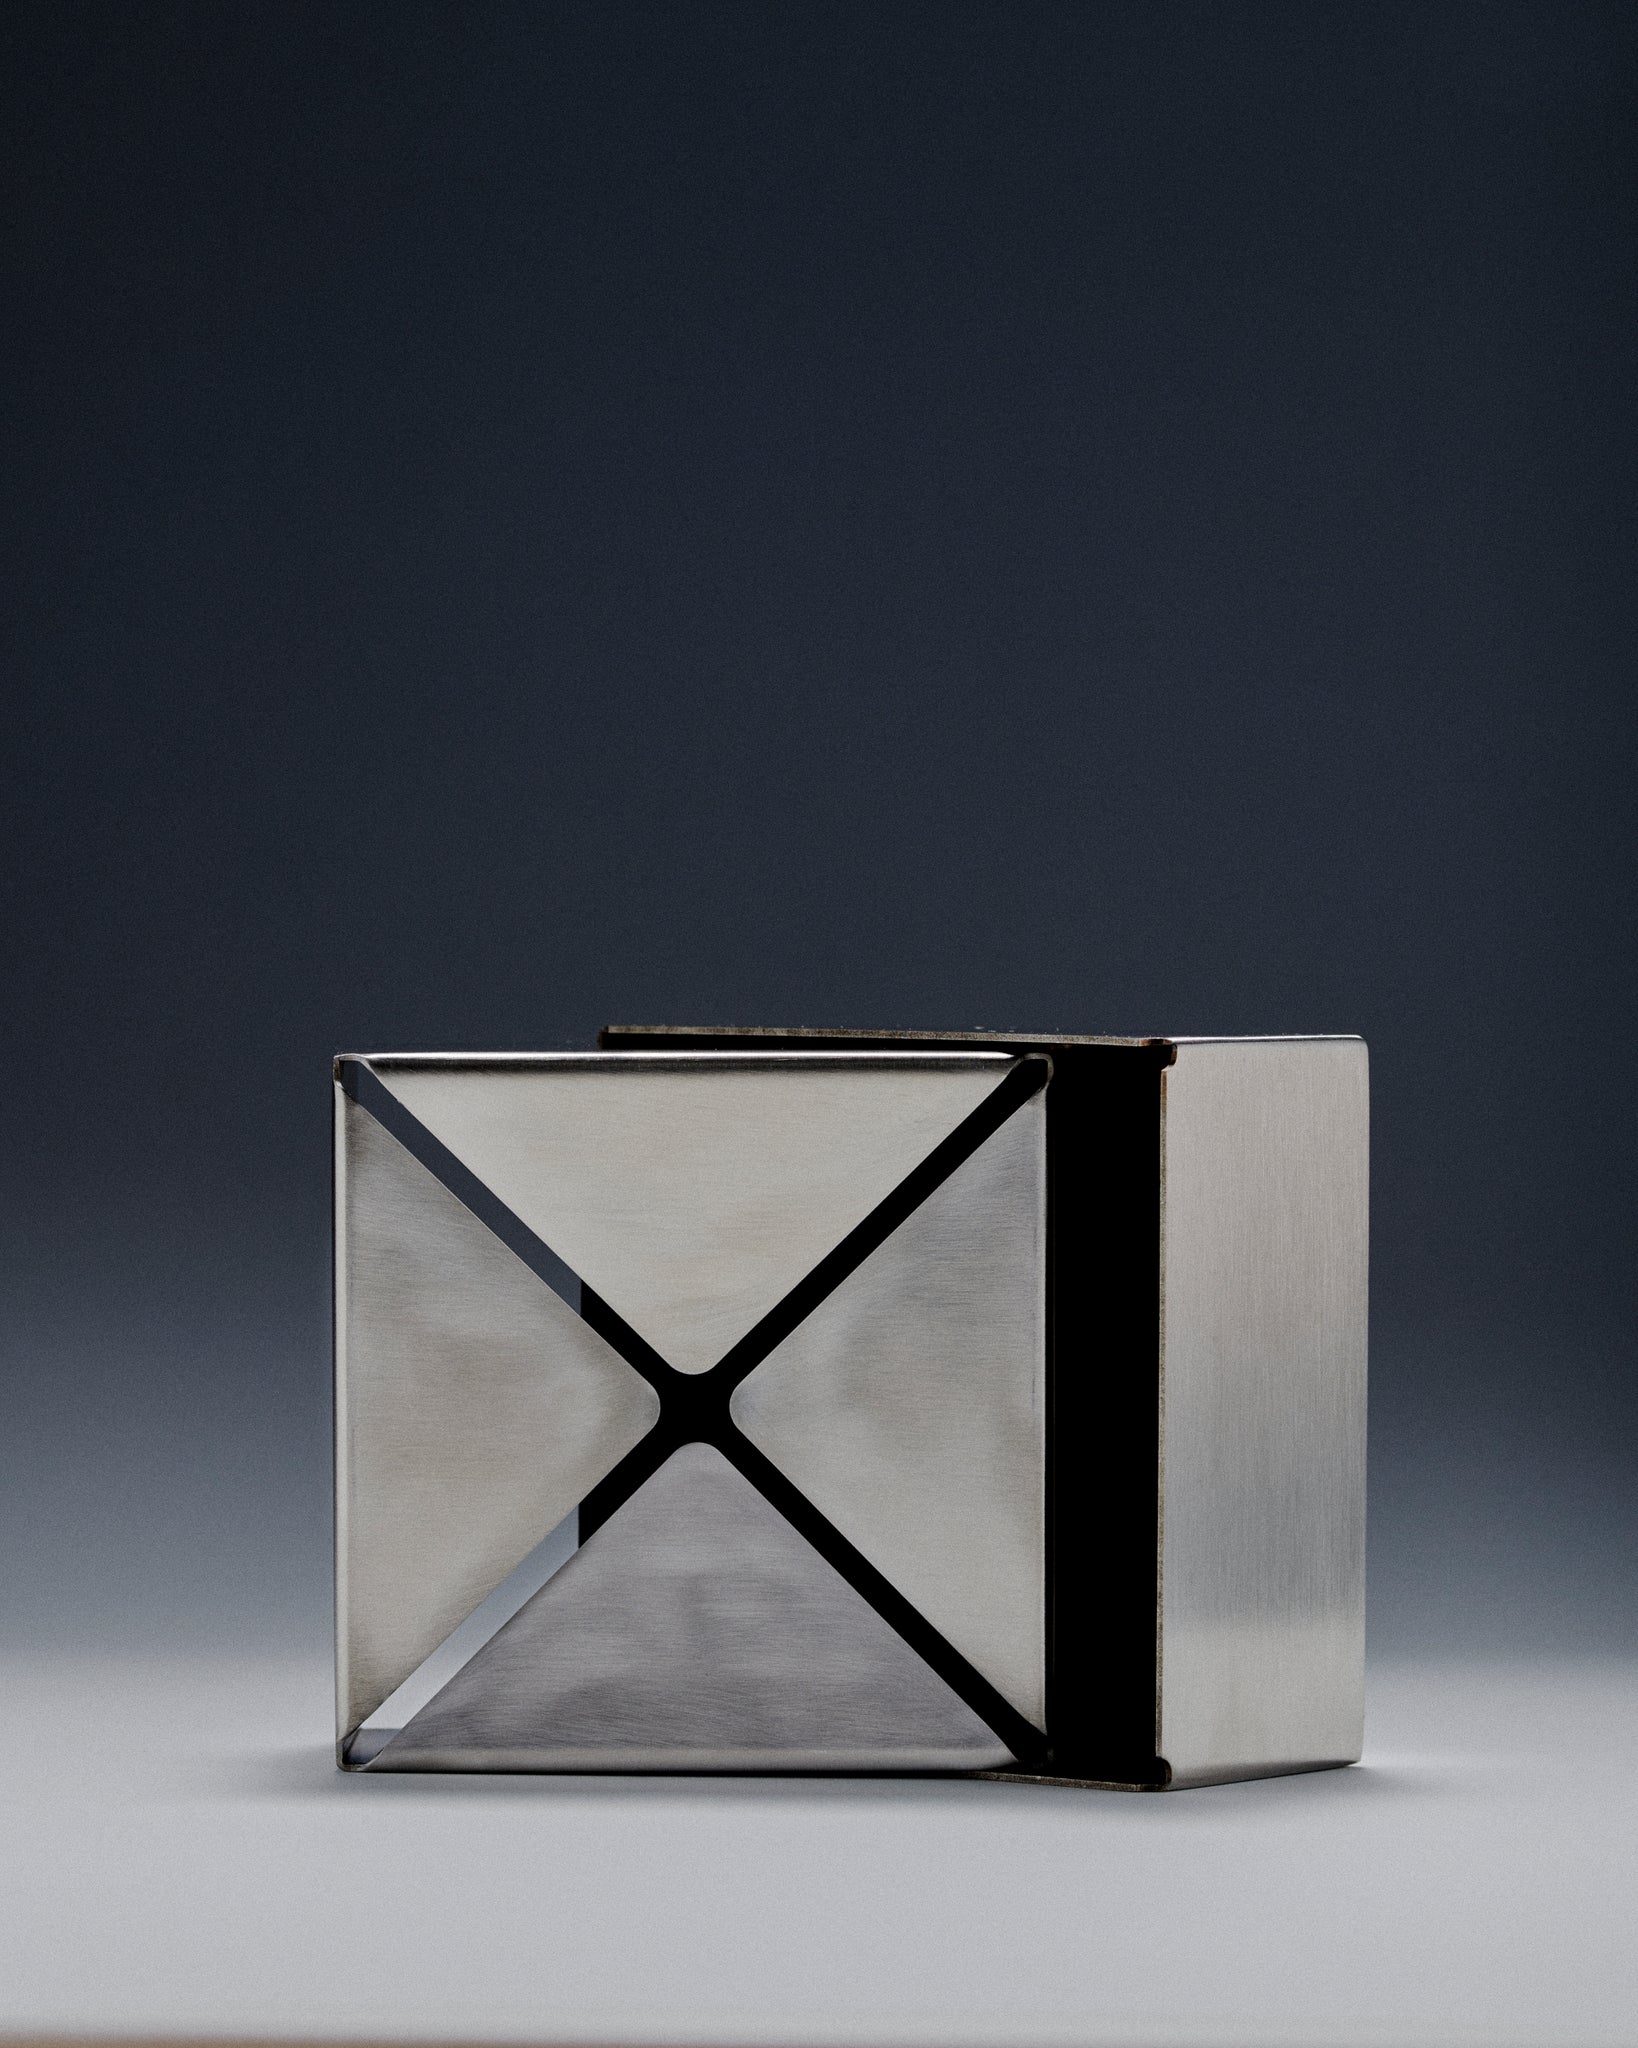 [A-001] Stainless Steel Ashtray